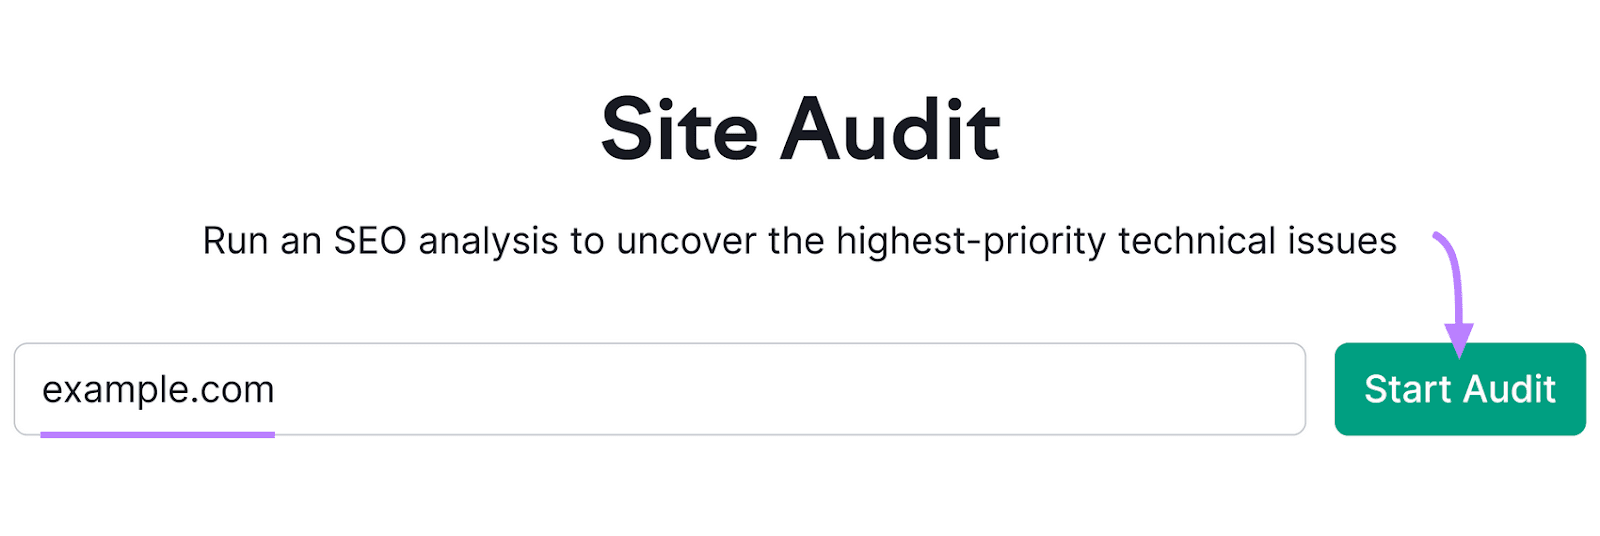 Site Audit tool with “example.com” entered in the domain bar and a "Start Audit" button with an arrow pointing towards it.